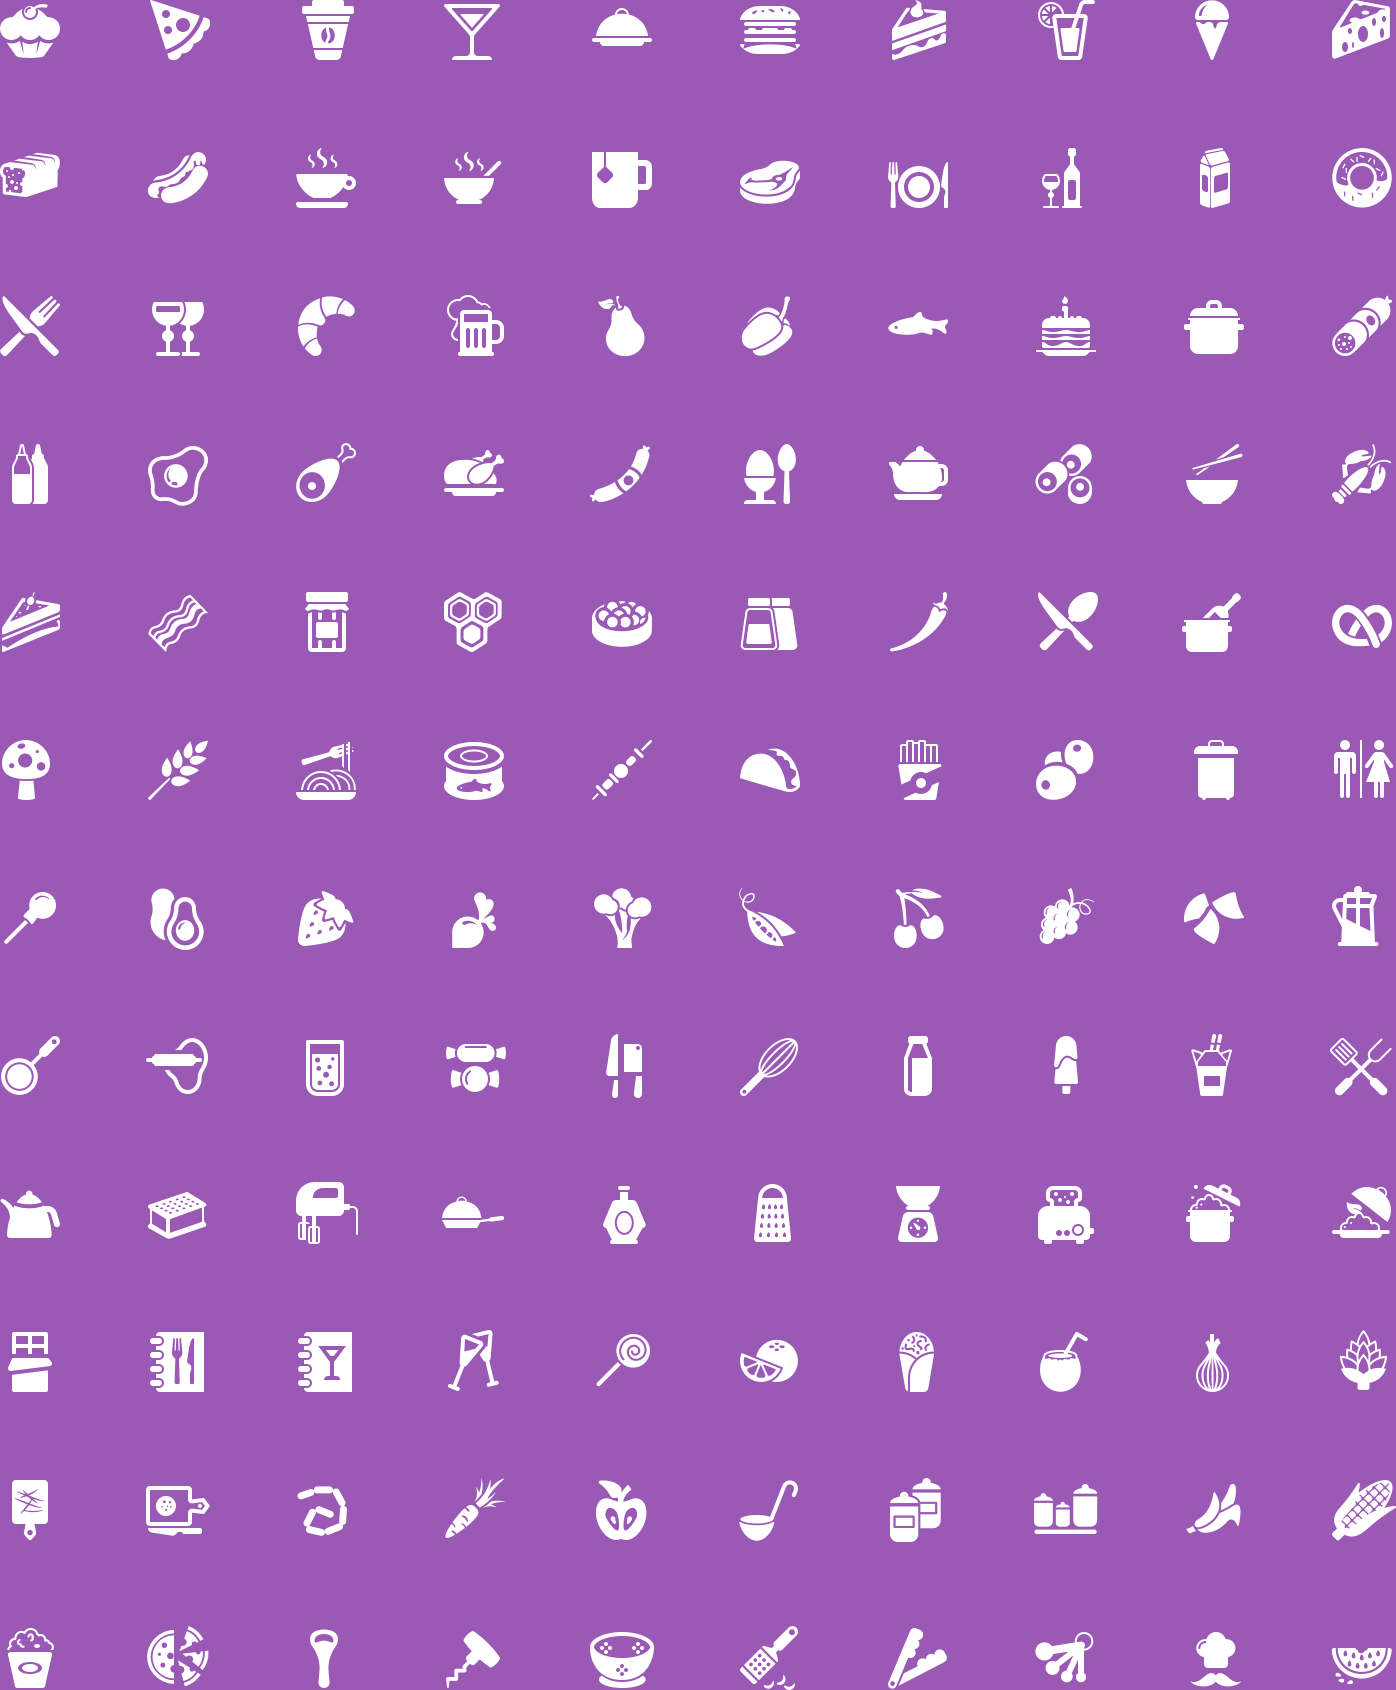 Food and Drinks Glyph Icons